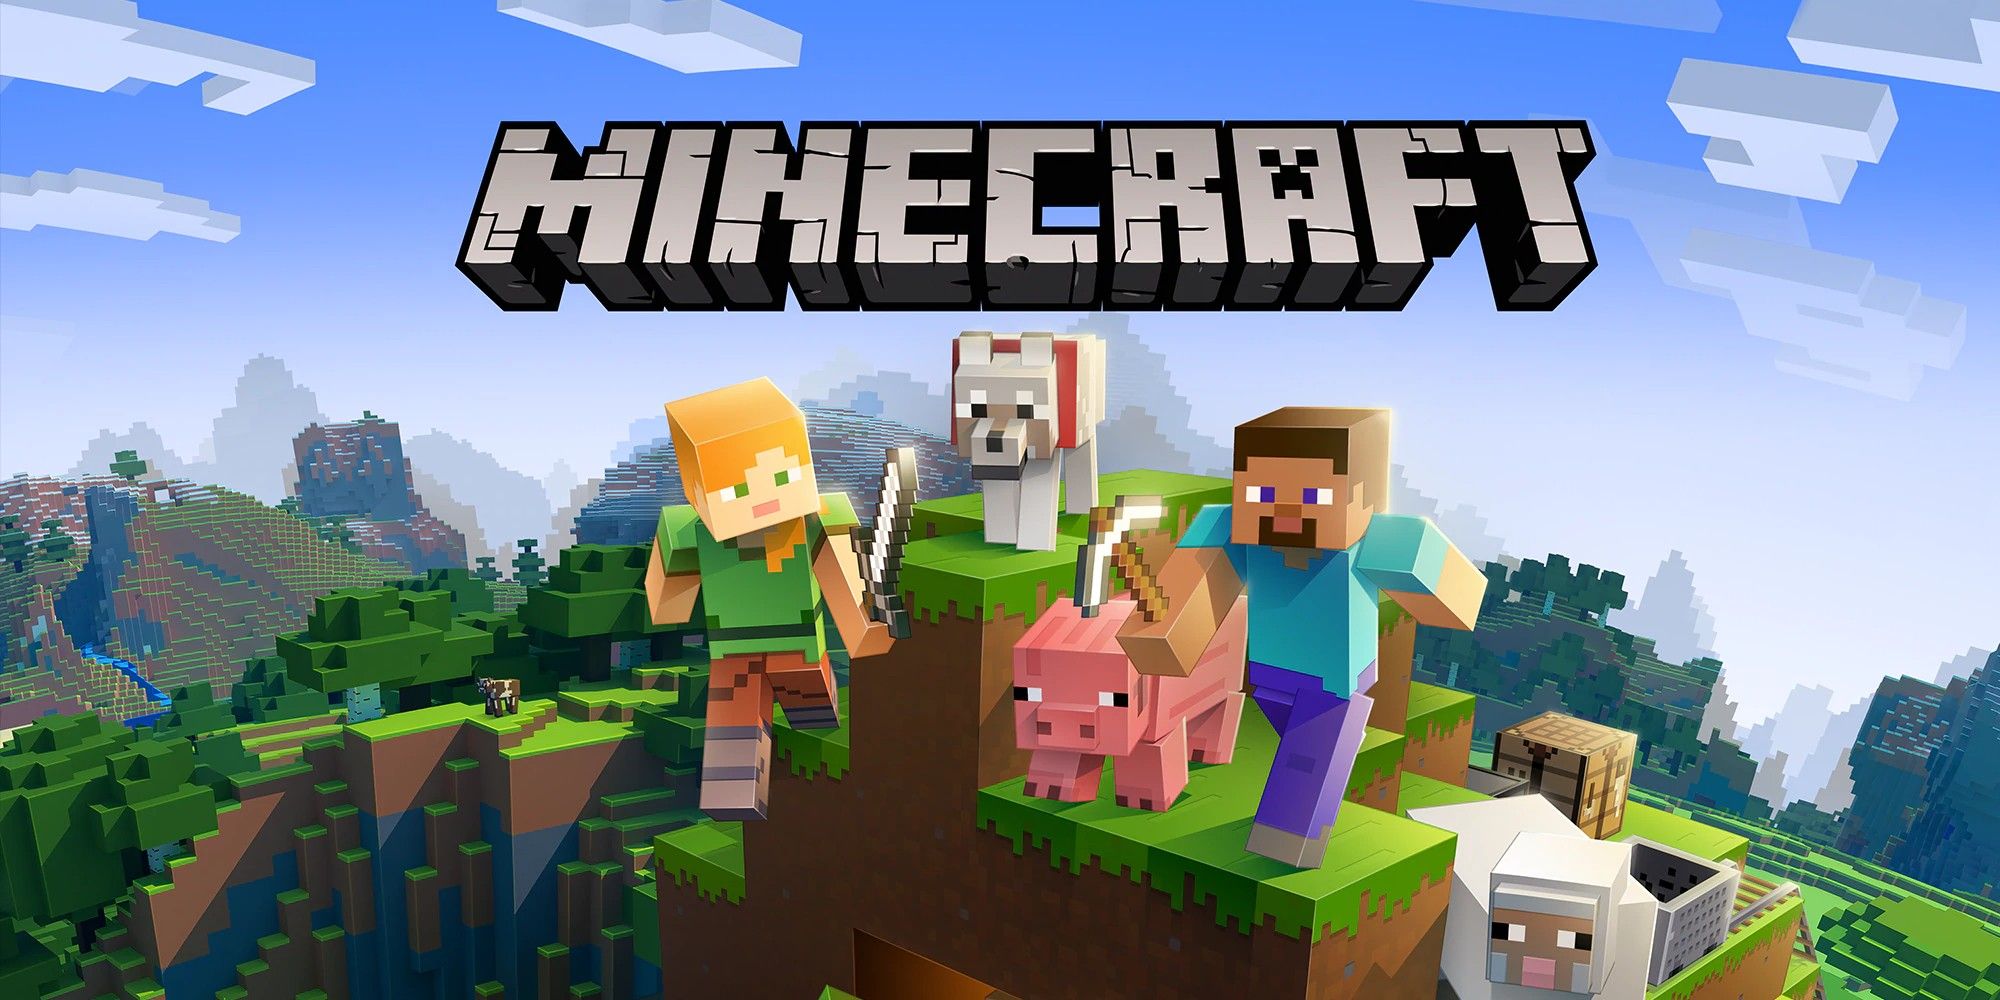 Minecraft cover art with players, enemies, and animals